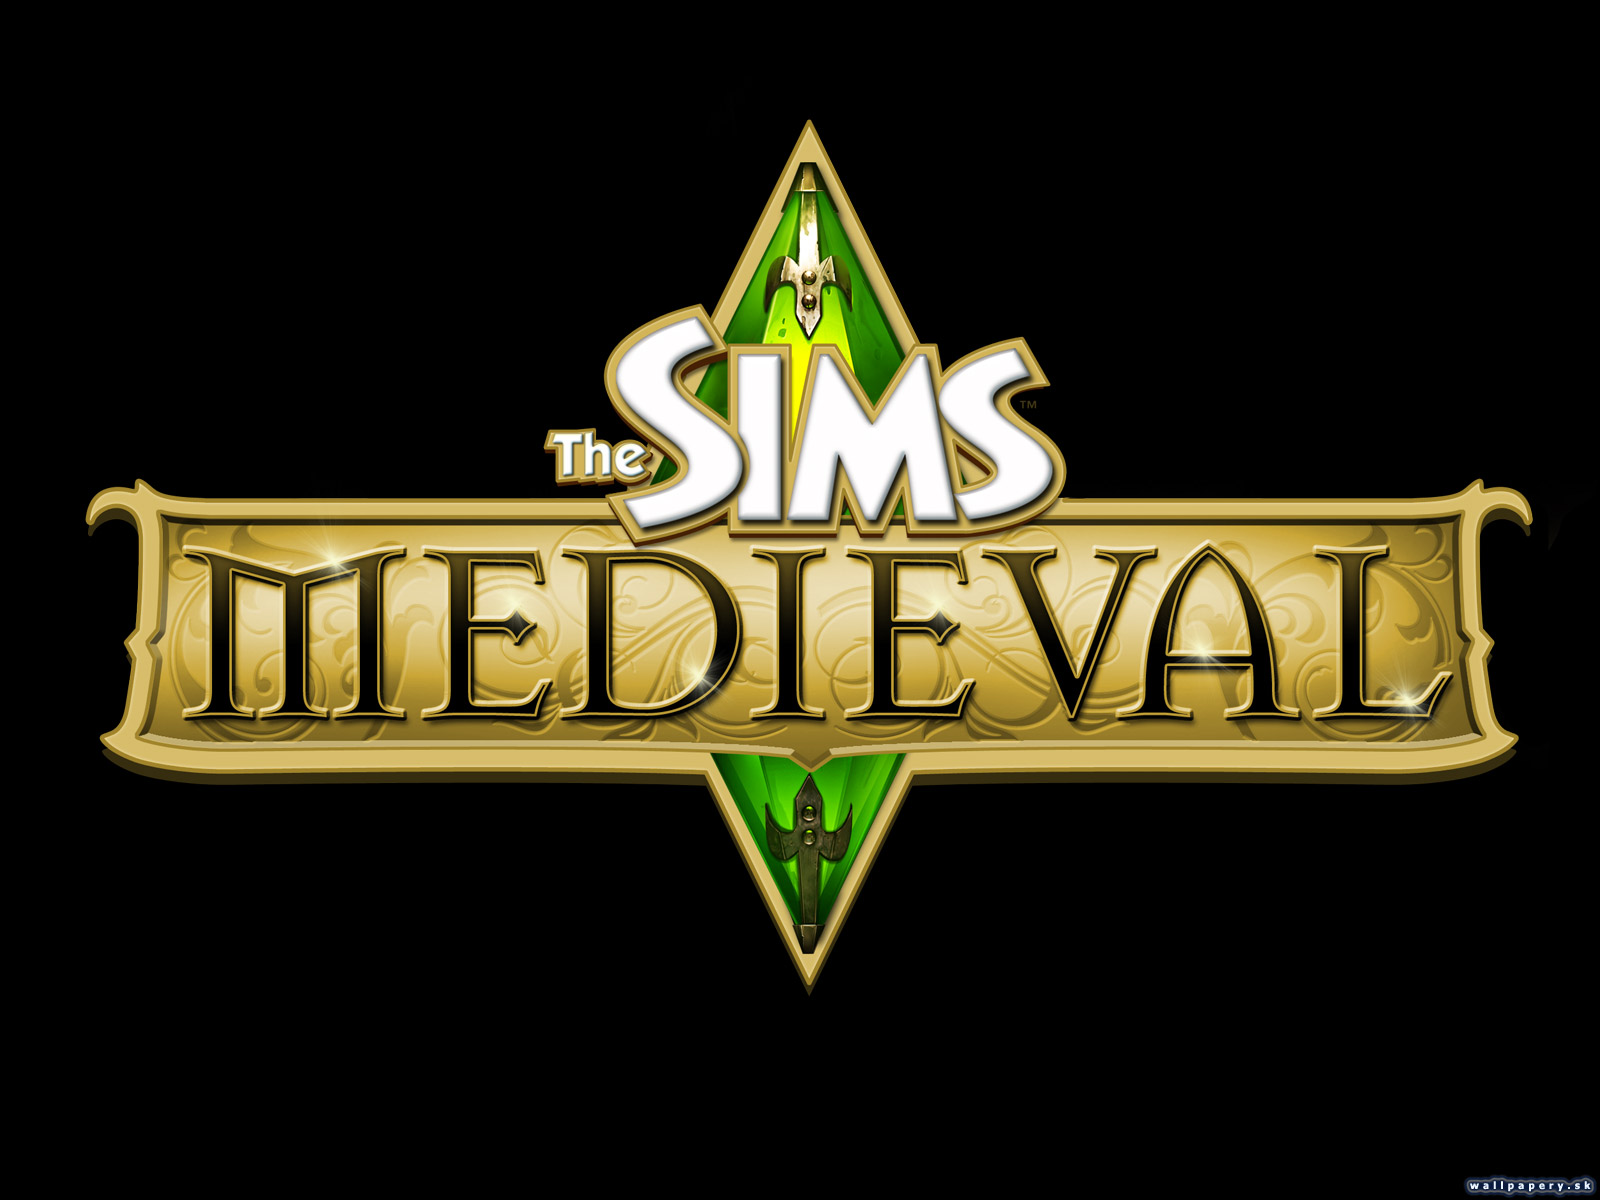 The Sims Medieval - wallpaper 3